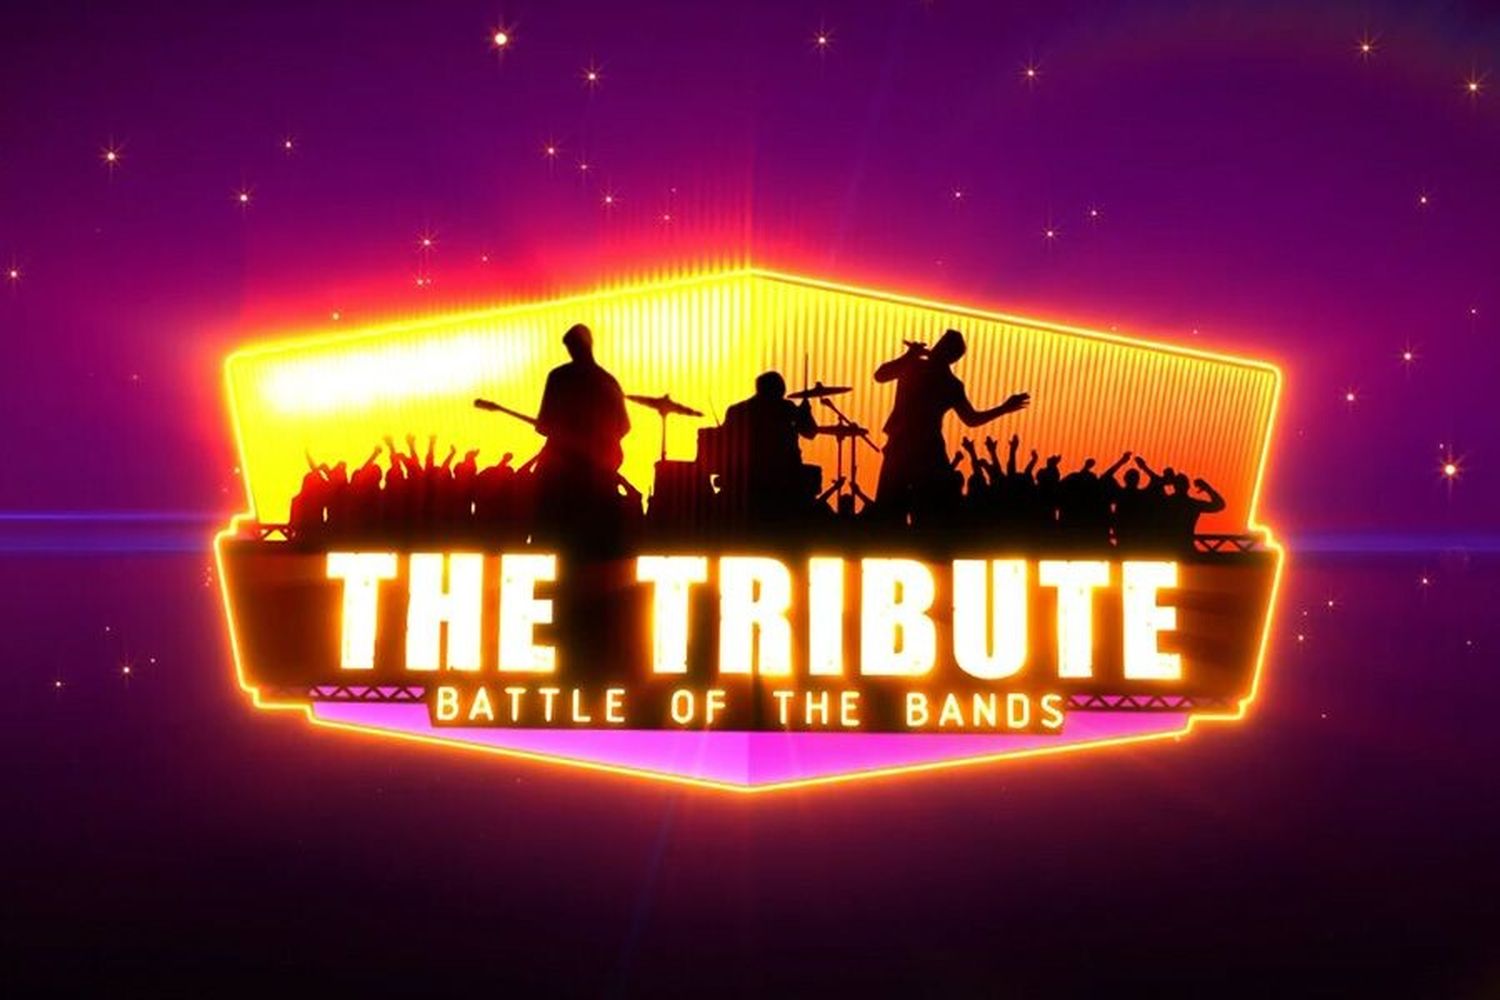 The Tribute Battle of the Bands Ziggo Dome The Tribute Live in